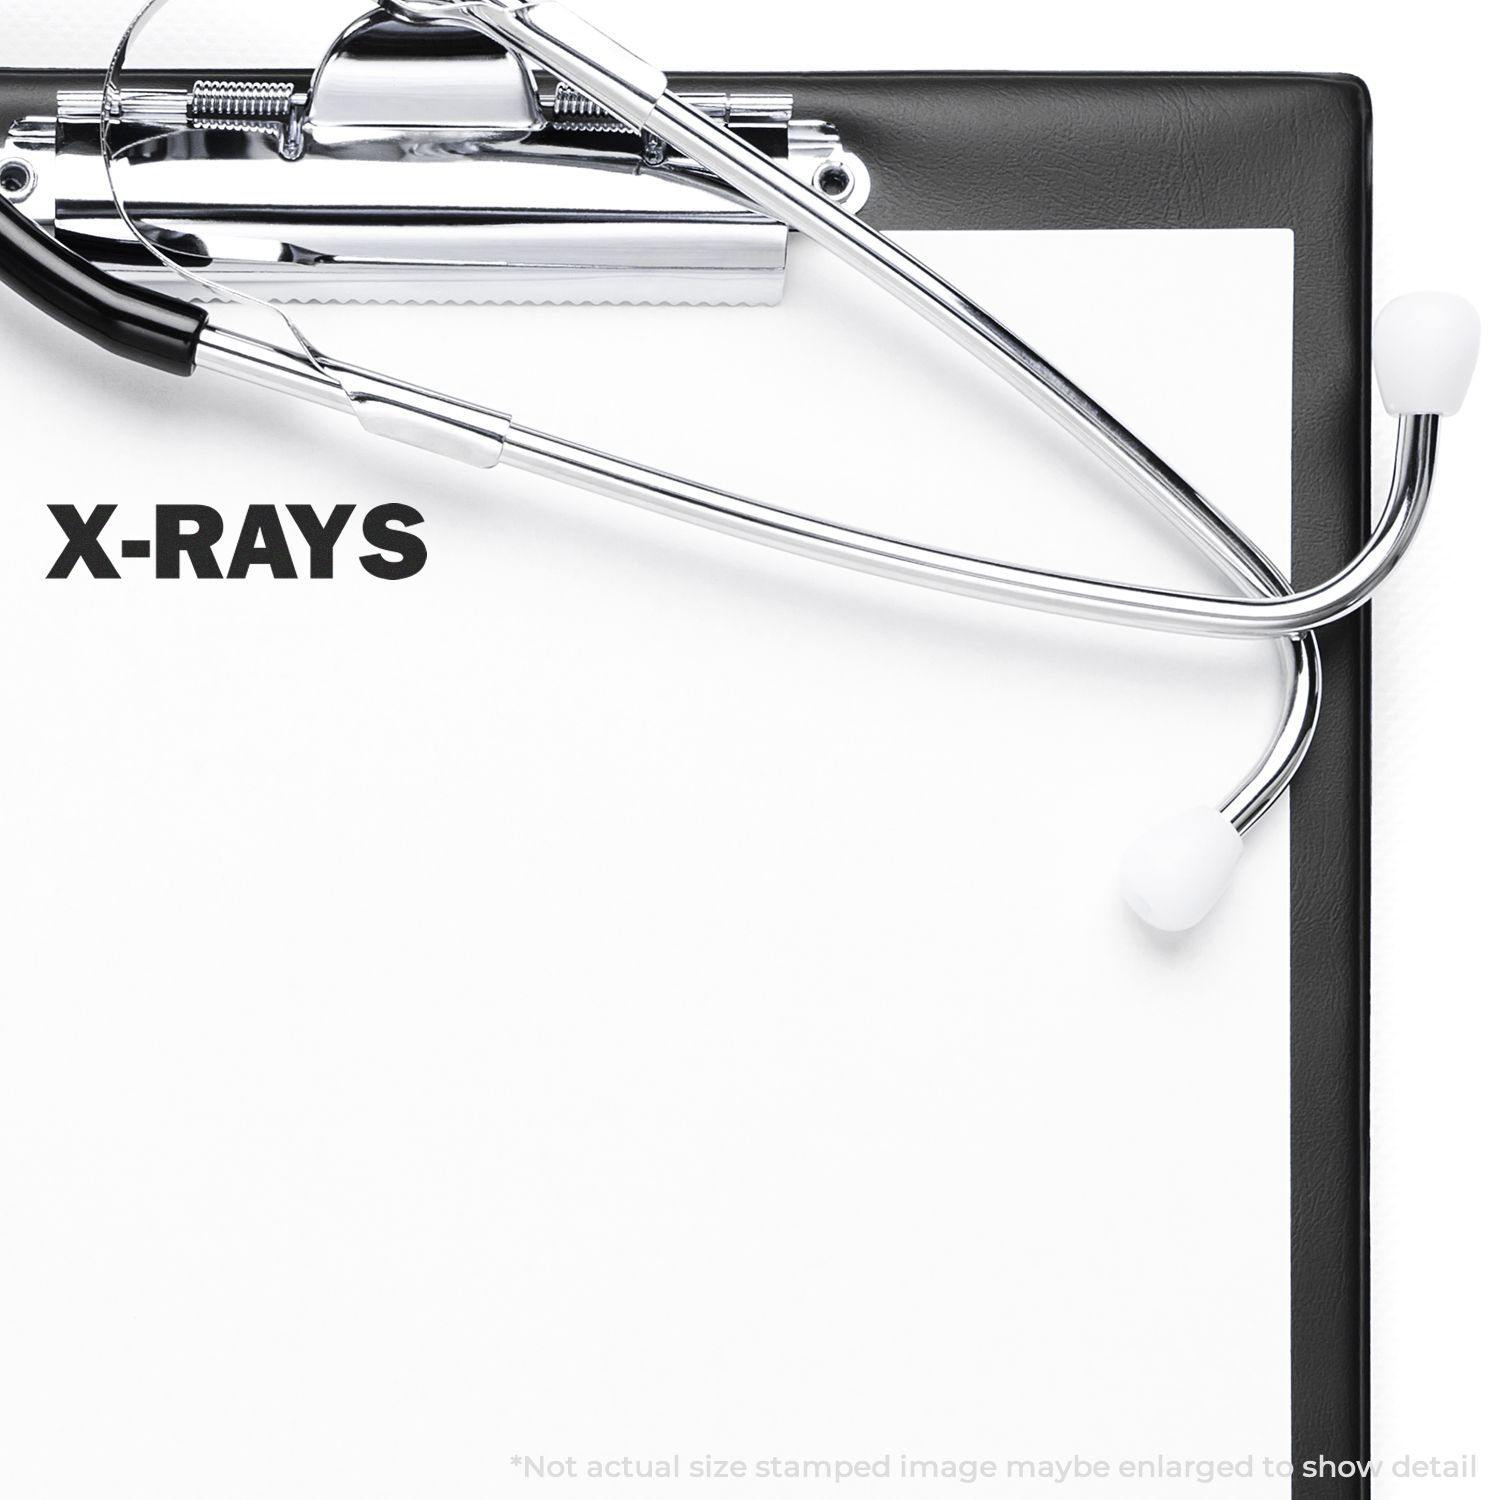 A self-inking stamp with a stamped image showing how the text "X-RAYS" in a large bold font is displayed by it after stamping.